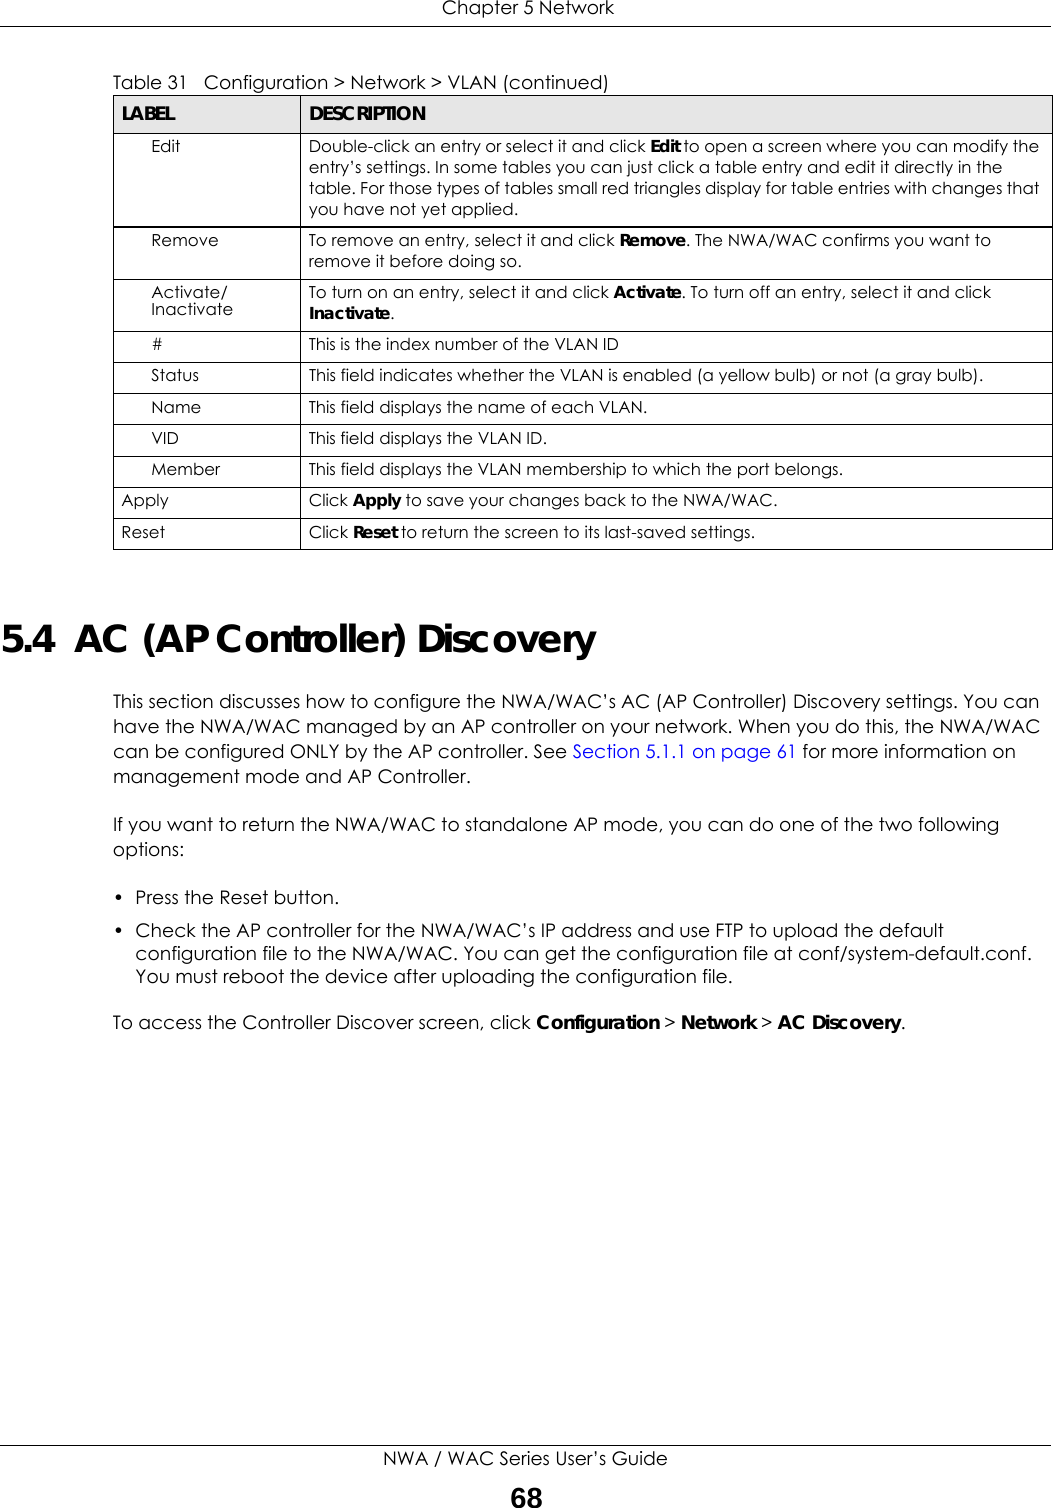  Chapter 5 NetworkNWA / WAC Series User’s Guide685.4  AC (AP Controller) DiscoveryThis section discusses how to configure the NWA/WAC’s AC (AP Controller) Discovery settings. You can have the NWA/WAC managed by an AP controller on your network. When you do this, the NWA/WAC can be configured ONLY by the AP controller. See Section 5.1.1 on page 61 for more information on management mode and AP Controller.If you want to return the NWA/WAC to standalone AP mode, you can do one of the two following options: • Press the Reset button.• Check the AP controller for the NWA/WAC’s IP address and use FTP to upload the default configuration file to the NWA/WAC. You can get the configuration file at conf/system-default.conf. You must reboot the device after uploading the configuration file. To access the Controller Discover screen, click Configuration &gt; Network &gt; AC Discovery.Edit Double-click an entry or select it and click Edit to open a screen where you can modify the entry’s settings. In some tables you can just click a table entry and edit it directly in the table. For those types of tables small red triangles display for table entries with changes that you have not yet applied.Remove To remove an entry, select it and click Remove. The NWA/WAC confirms you want to remove it before doing so.Activate/Inactivate To turn on an entry, select it and click Activate. To turn off an entry, select it and click Inactivate.# This is the index number of the VLAN ID Status This field indicates whether the VLAN is enabled (a yellow bulb) or not (a gray bulb).Name This field displays the name of each VLAN.VID This field displays the VLAN ID.Member This field displays the VLAN membership to which the port belongs.Apply Click Apply to save your changes back to the NWA/WAC.Reset Click Reset to return the screen to its last-saved settings. Table 31   Configuration &gt; Network &gt; VLAN (continued)LABEL  DESCRIPTION